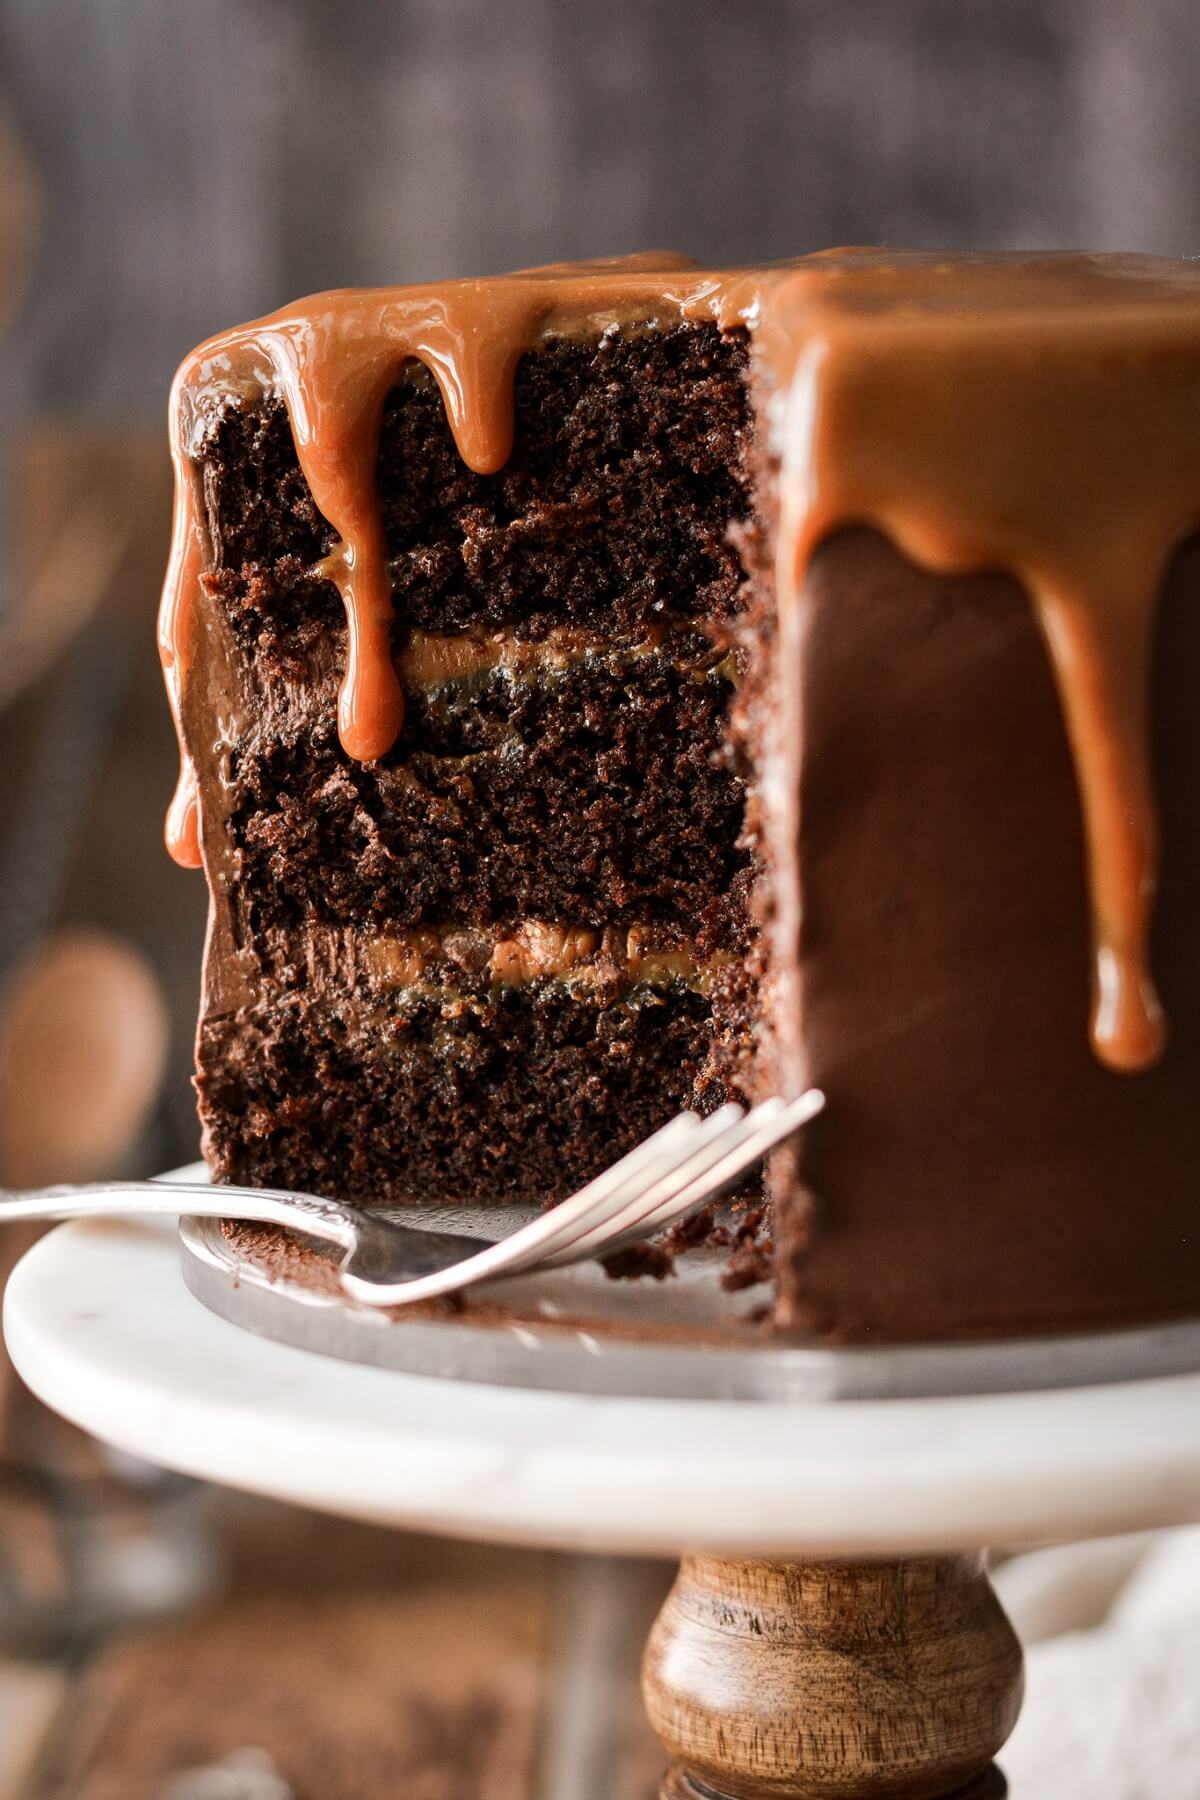 Chocolate caramel toffee cake with a slice cut.